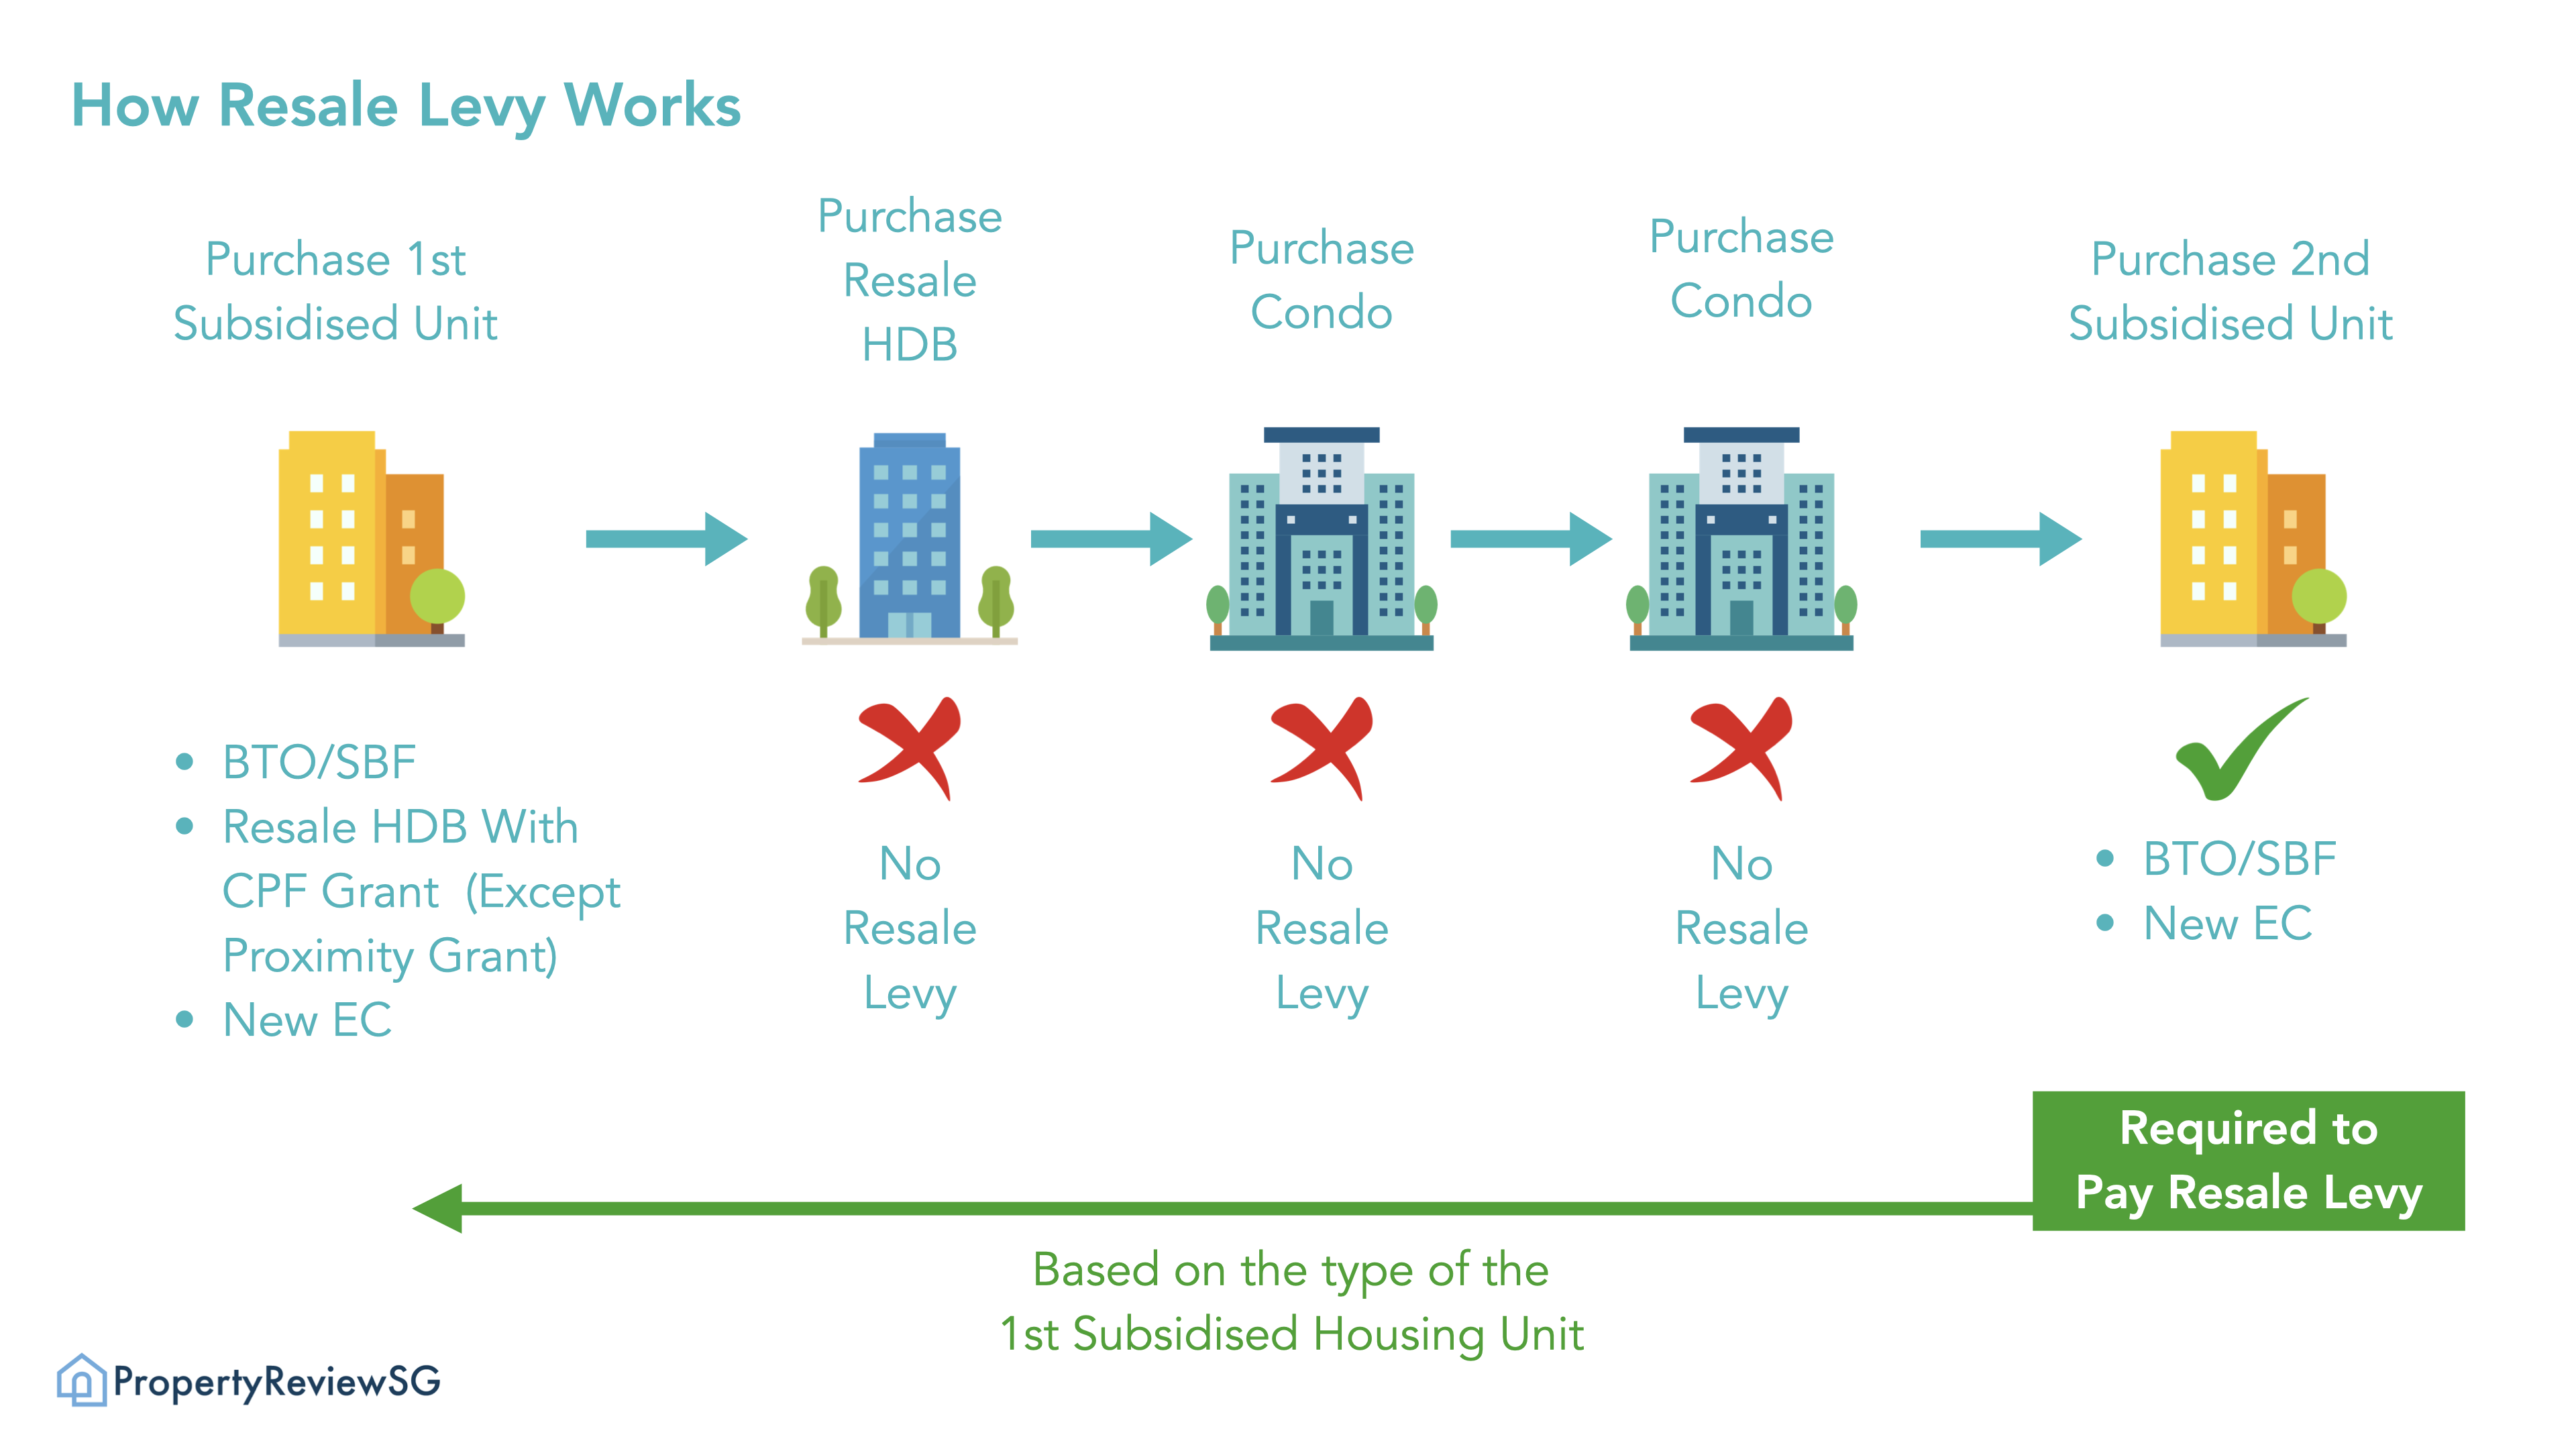 How Resale Levy Works